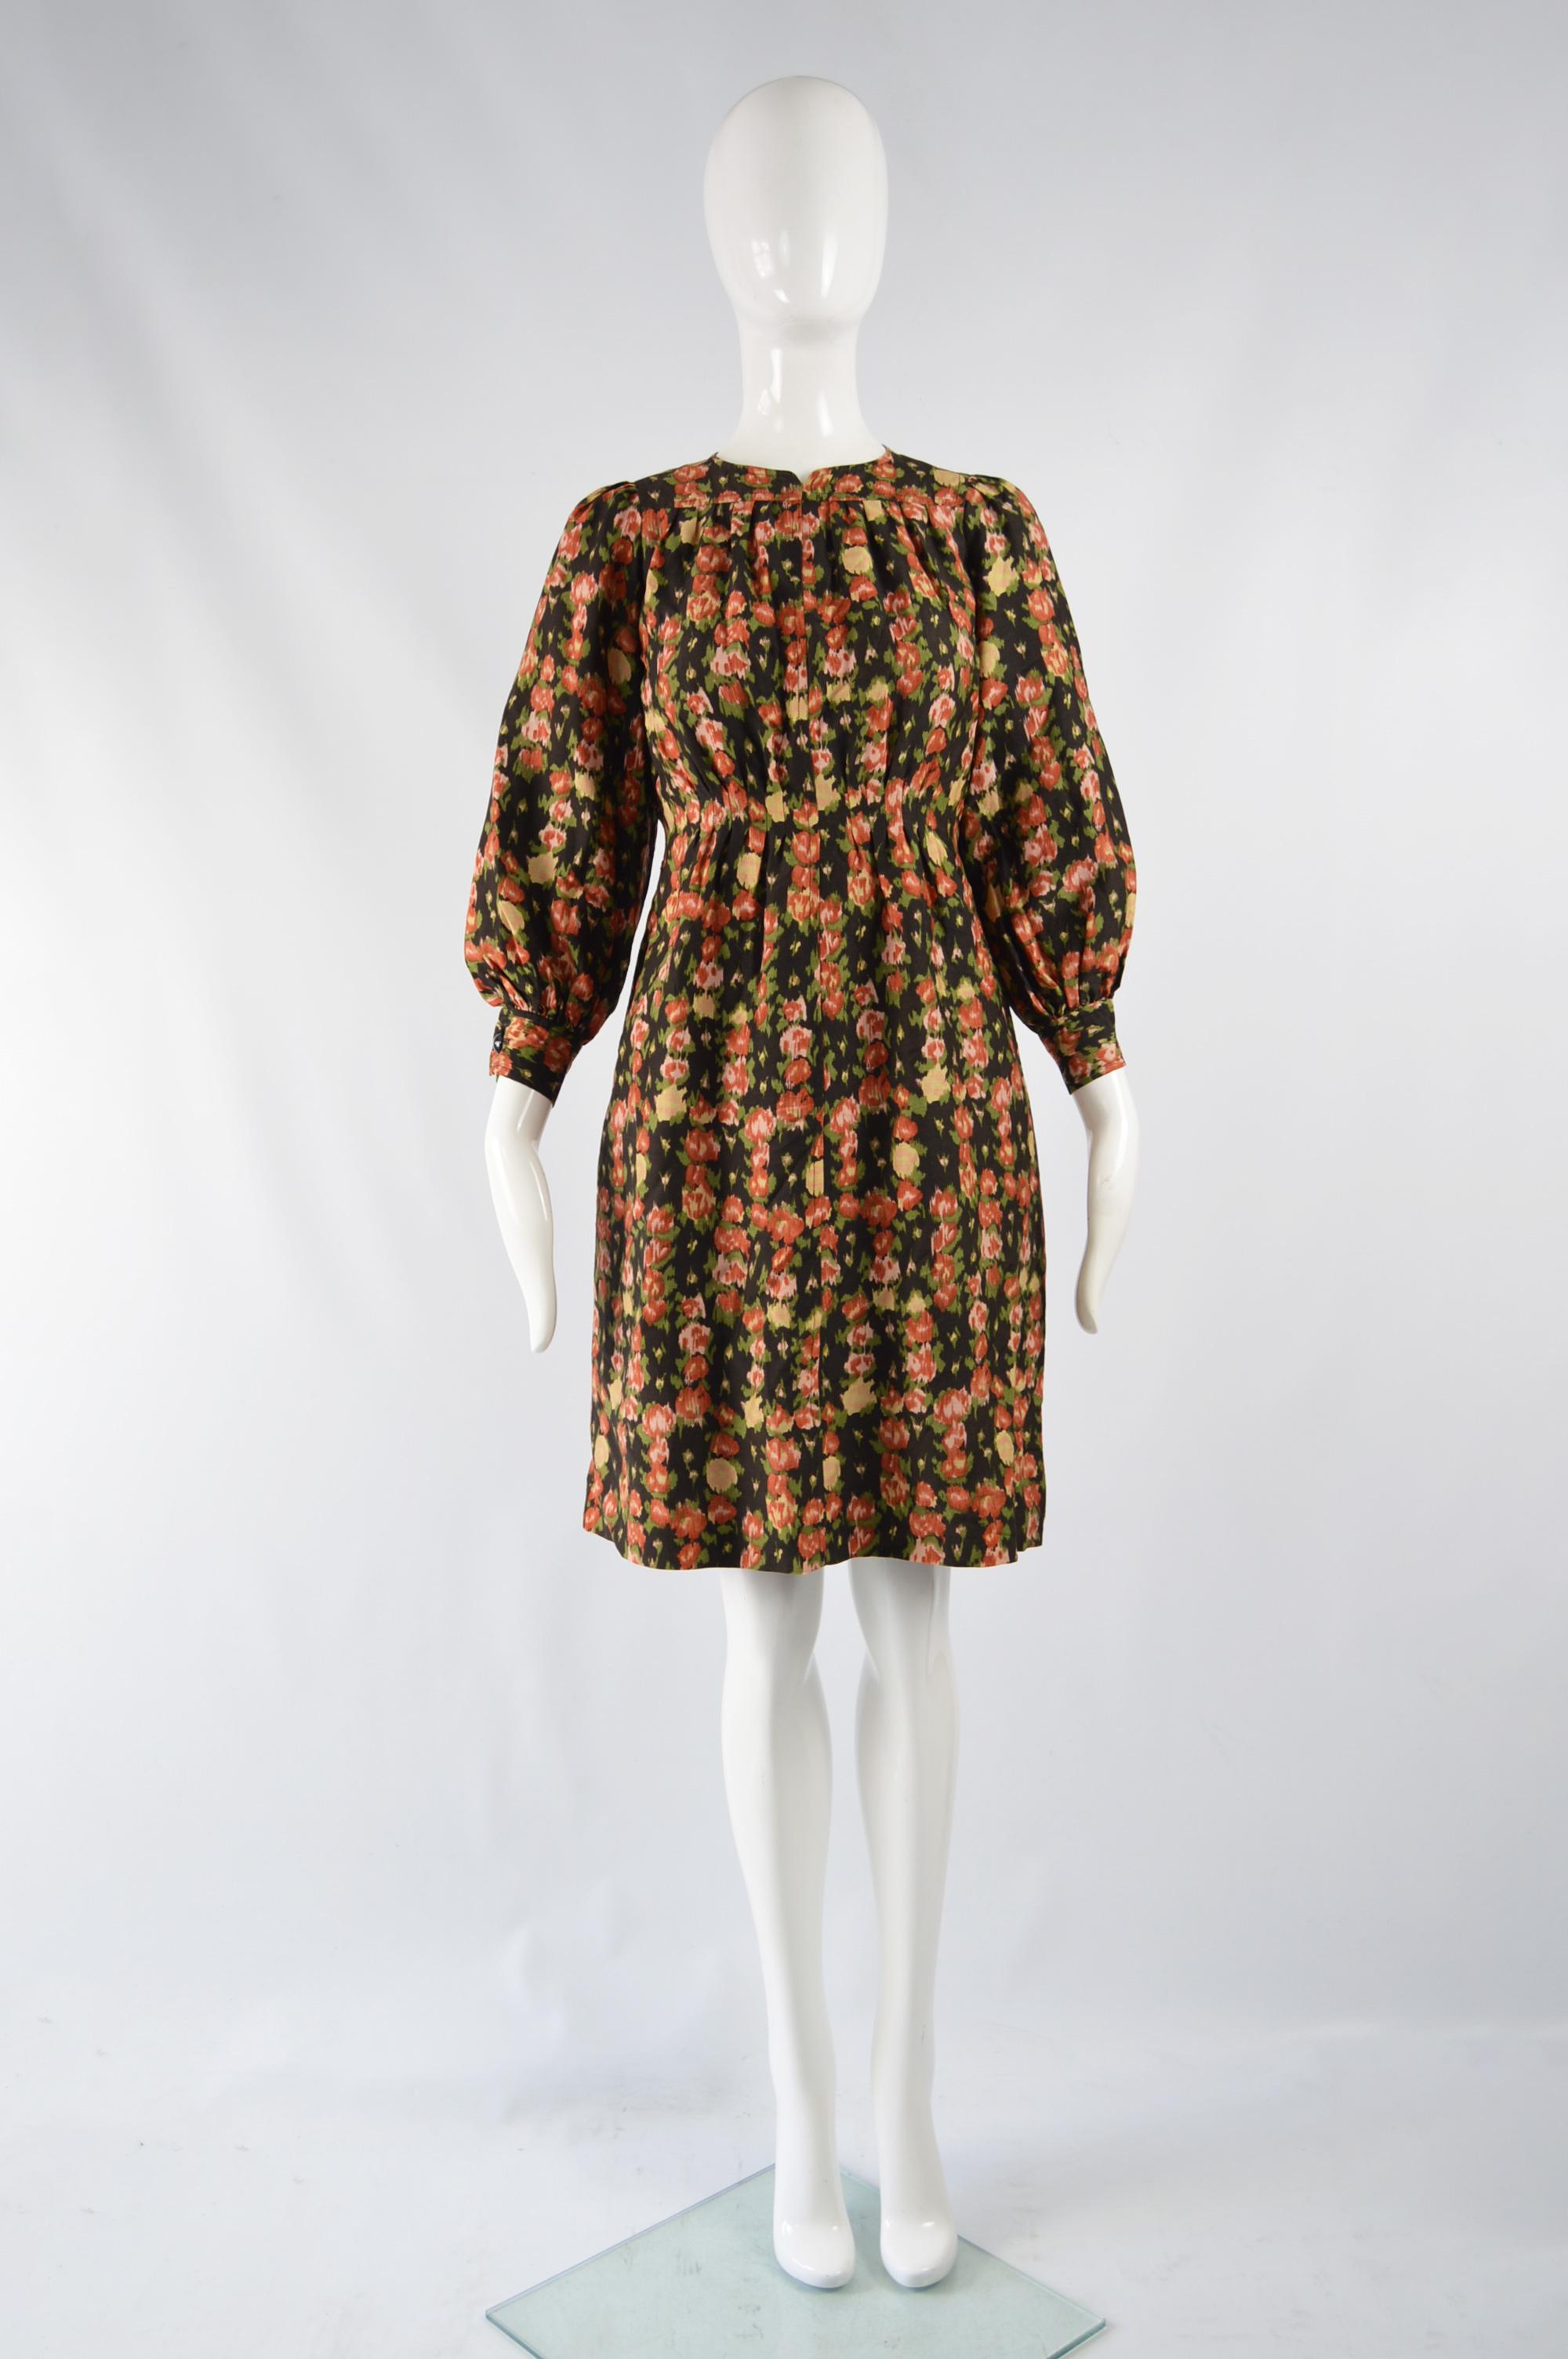 A beautiful vintage womens dress from the 70s by luxury French fashion designer, Emanuel Ungaro. In a black floral printed fabric with large puff sleeves and a pleated skirt. Great for day or evening. 

Size: Unlabelled; fits like a UK 10/ US 6/ EU